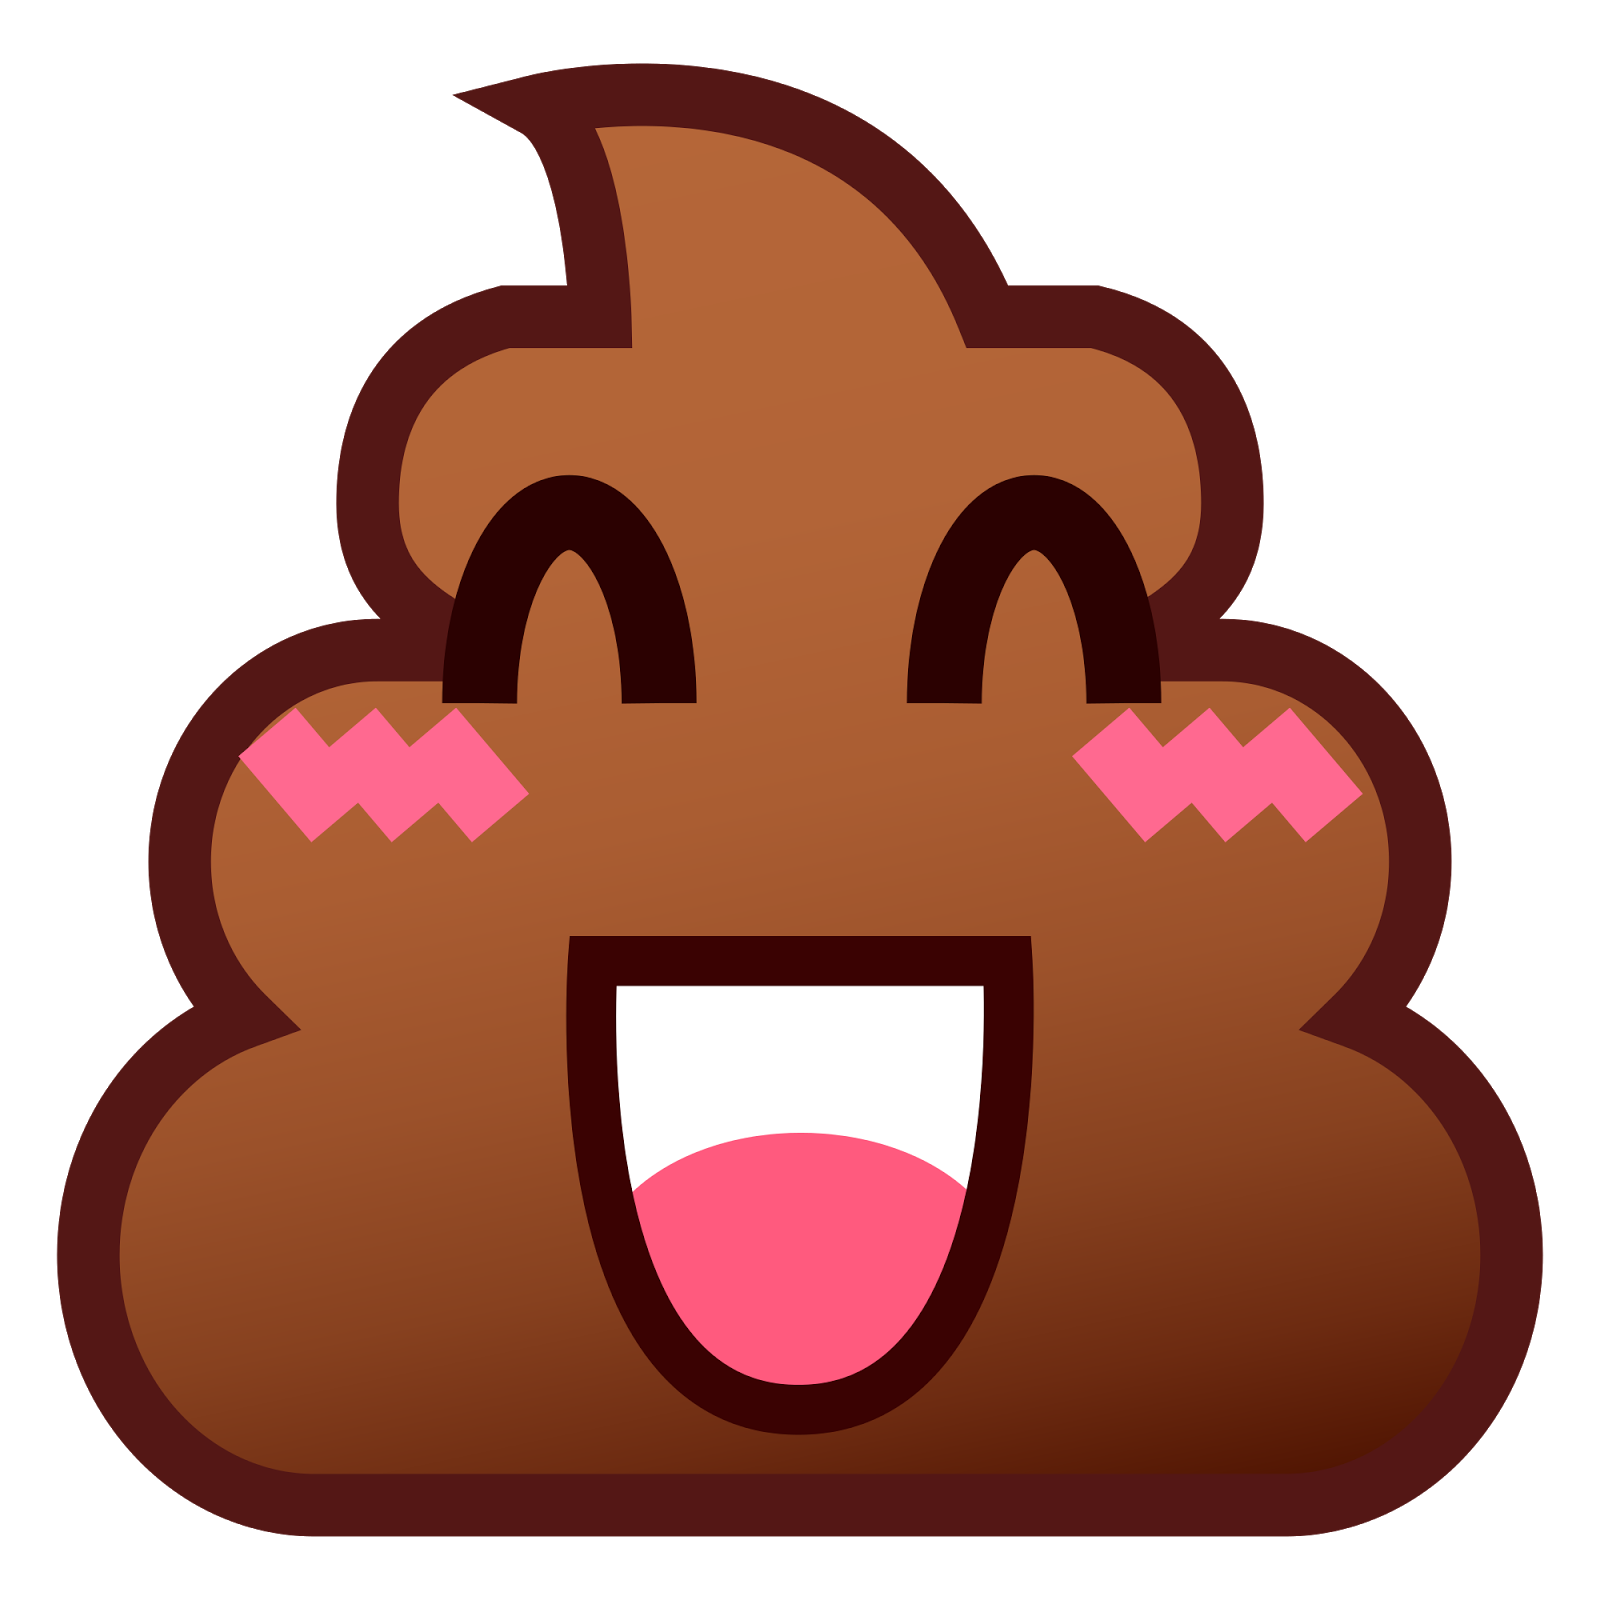 shhh clipart zip mouth